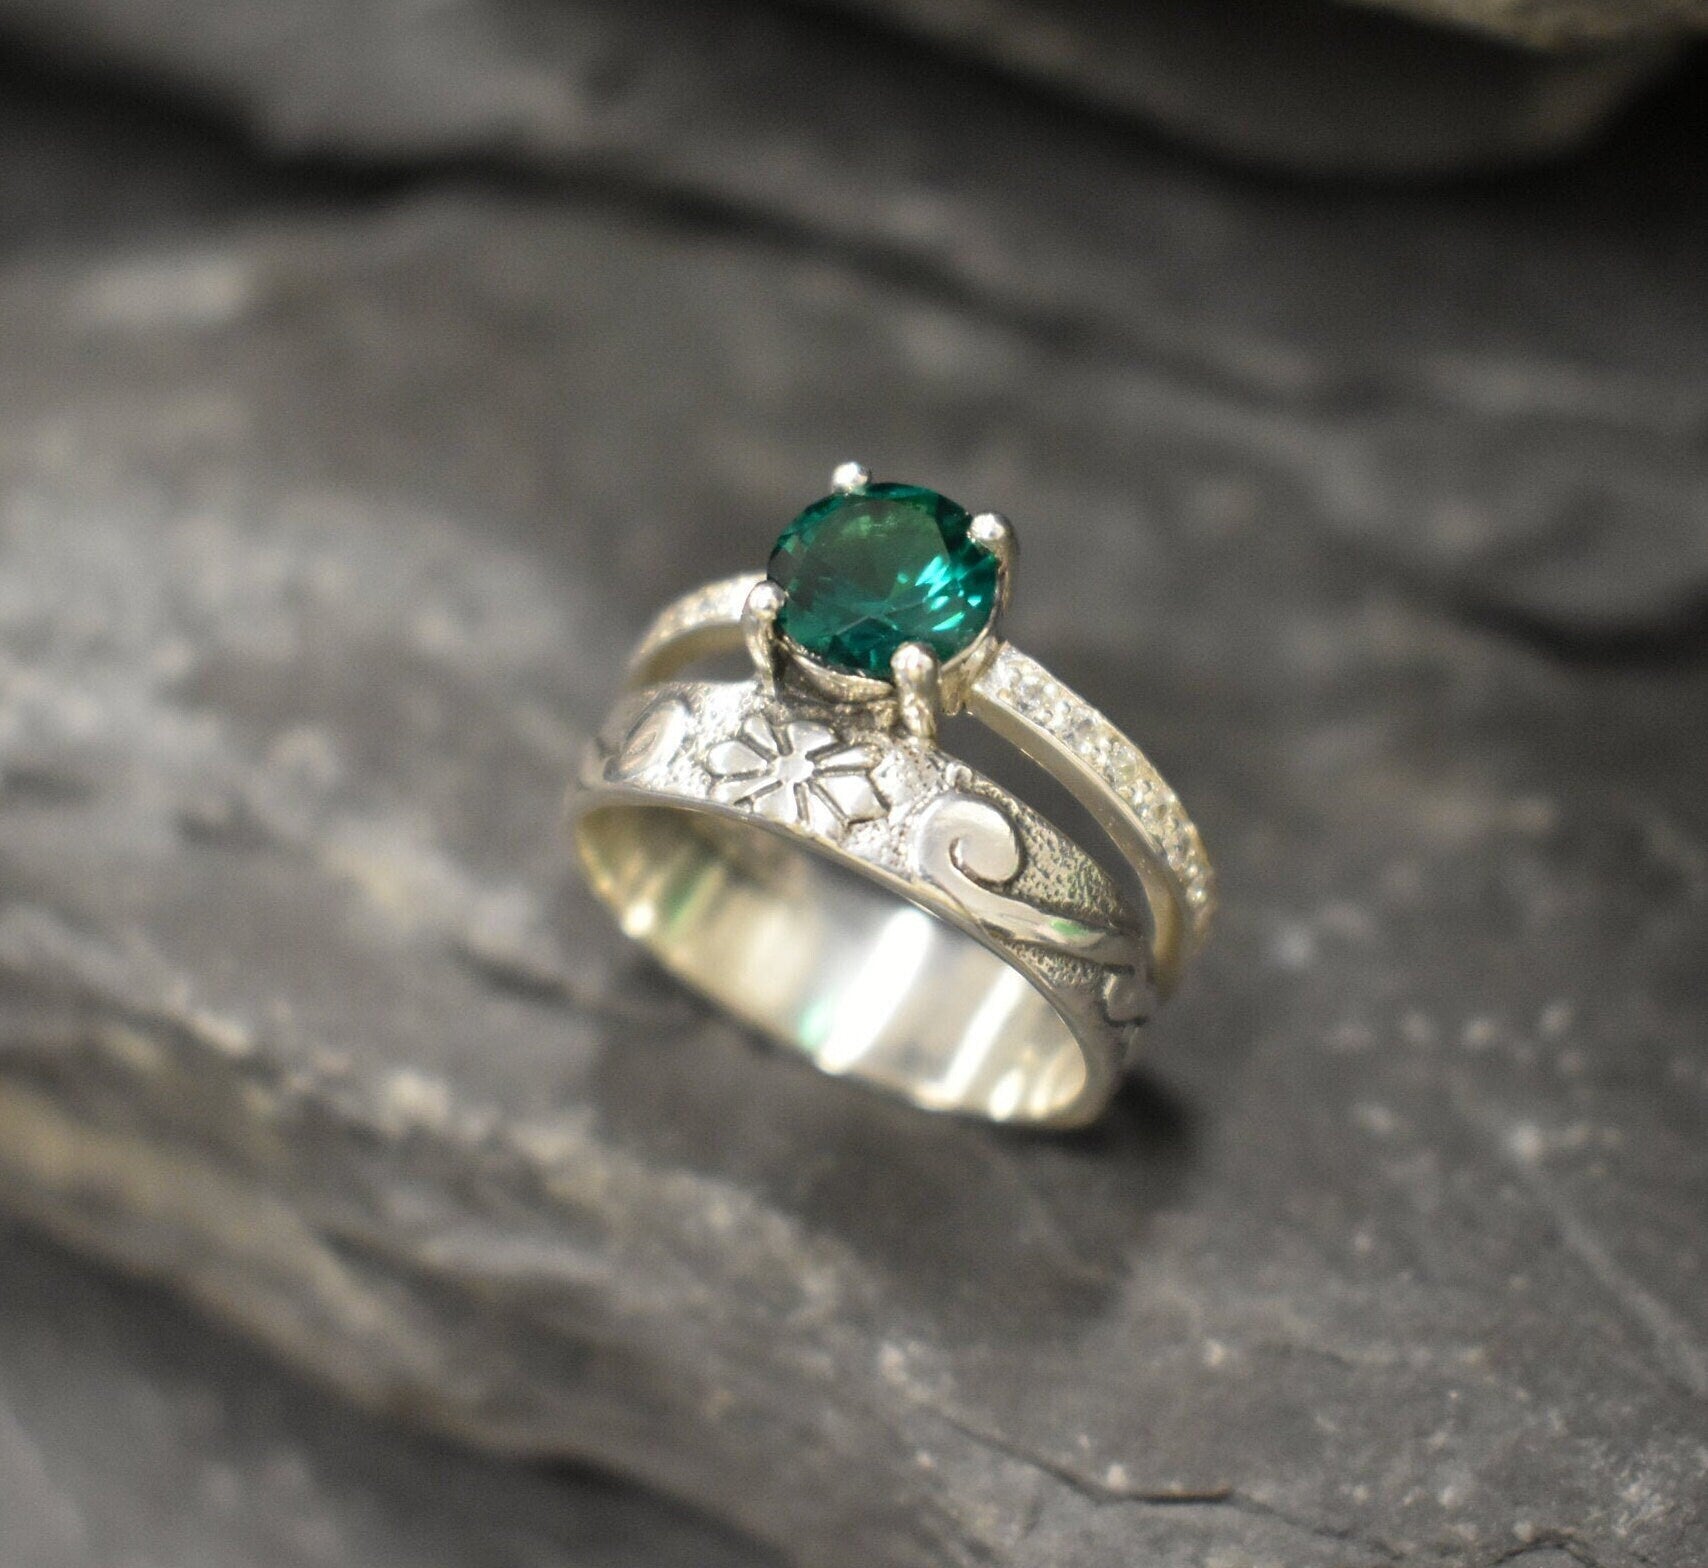 Emerald Ring, Created Emerald, Double Band Ring, Two Rings Set, Vintage Rings, Set of Stacked Rings, Green Stone Ring, Sterling Silver Ring